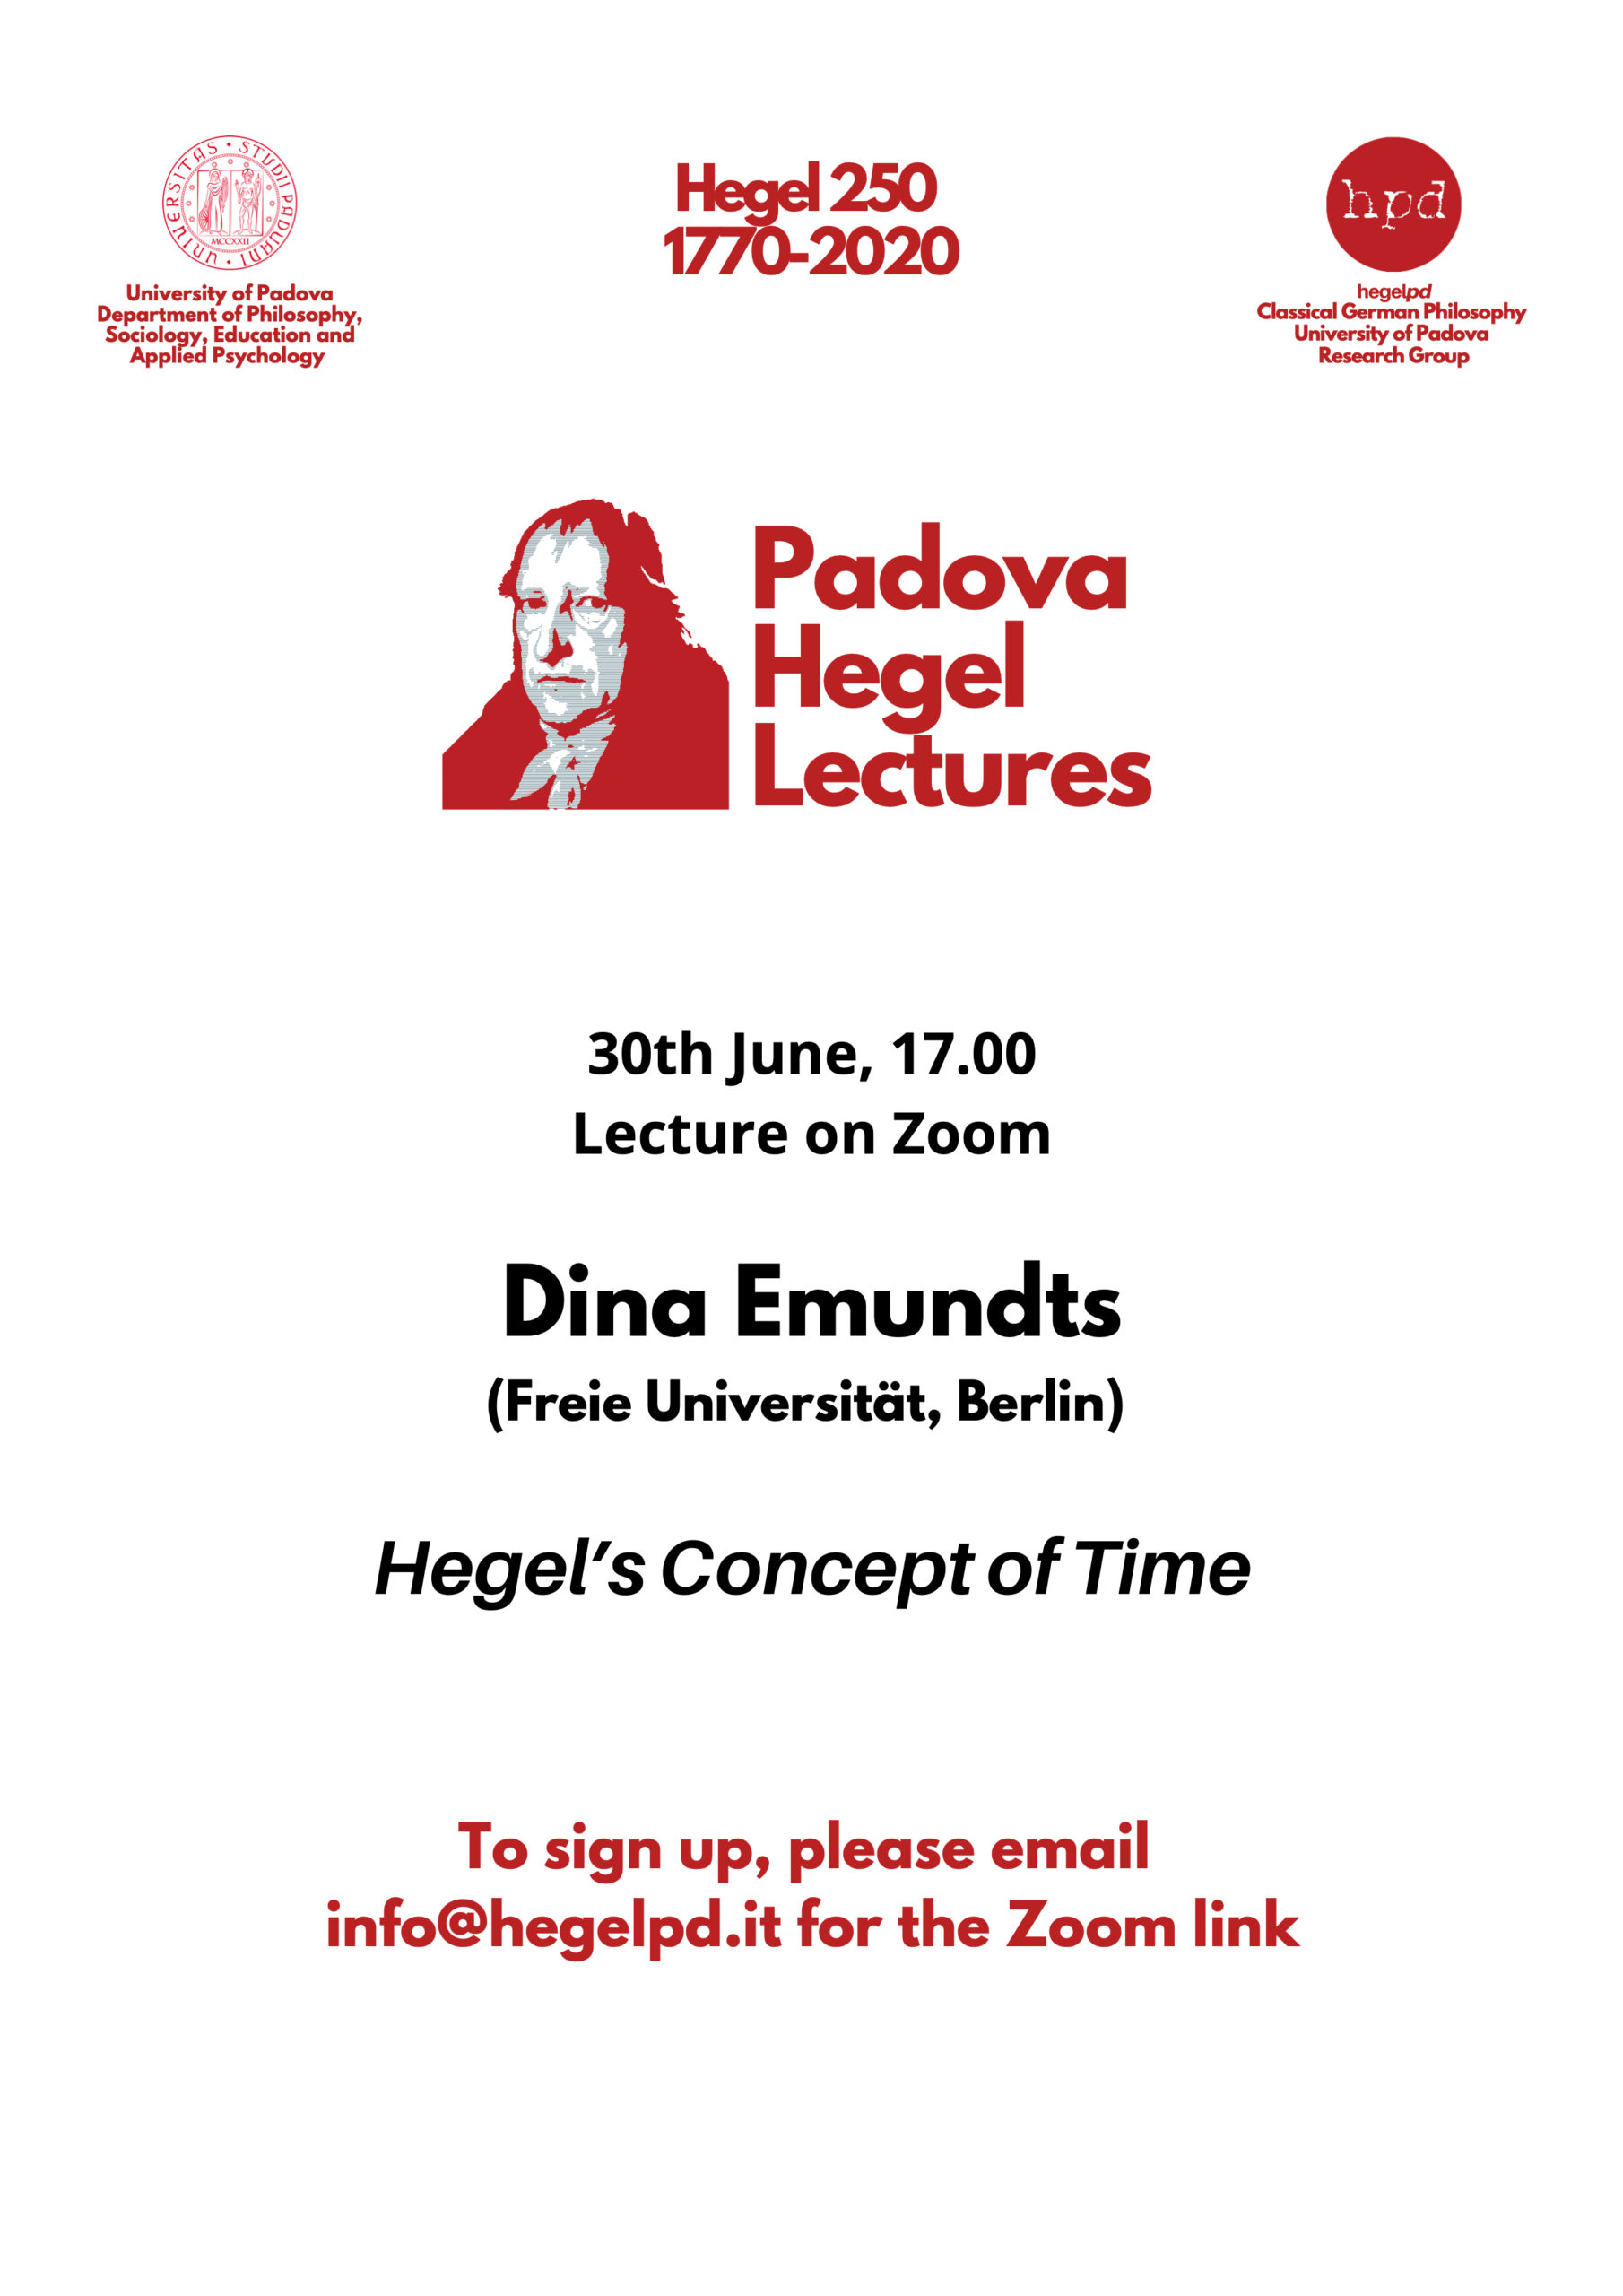 HPD – PADOVA HEGEL LECTURES 2020: DINA EMUNDTS (Freie Universität, Berlin): “Hegel’s Concept of Time” (LECTURE ON ZOOM, JUNE 30TH, 2020)